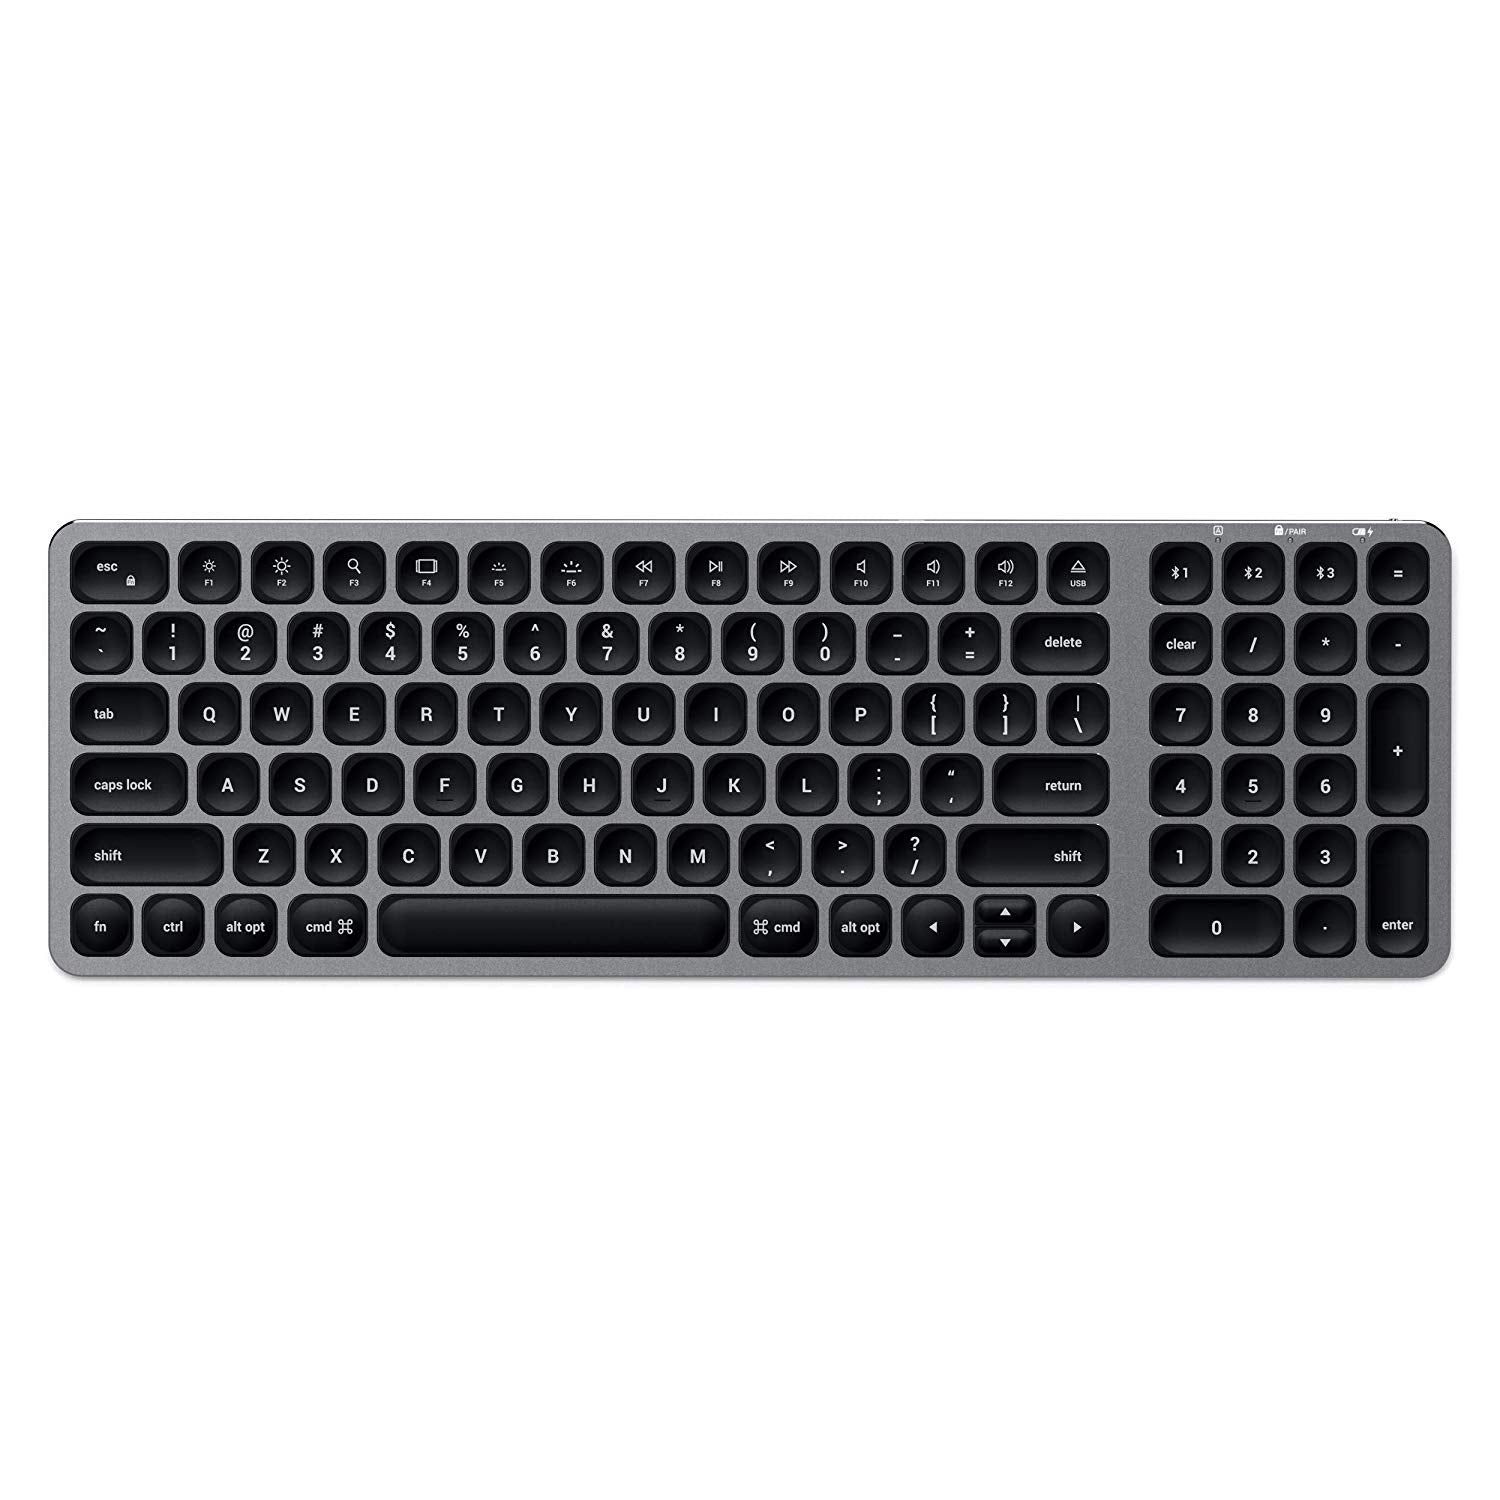 [OPEN BOX] SATECHI Compact Backlit Bluetooth Keyboard for Mac - Space Gray